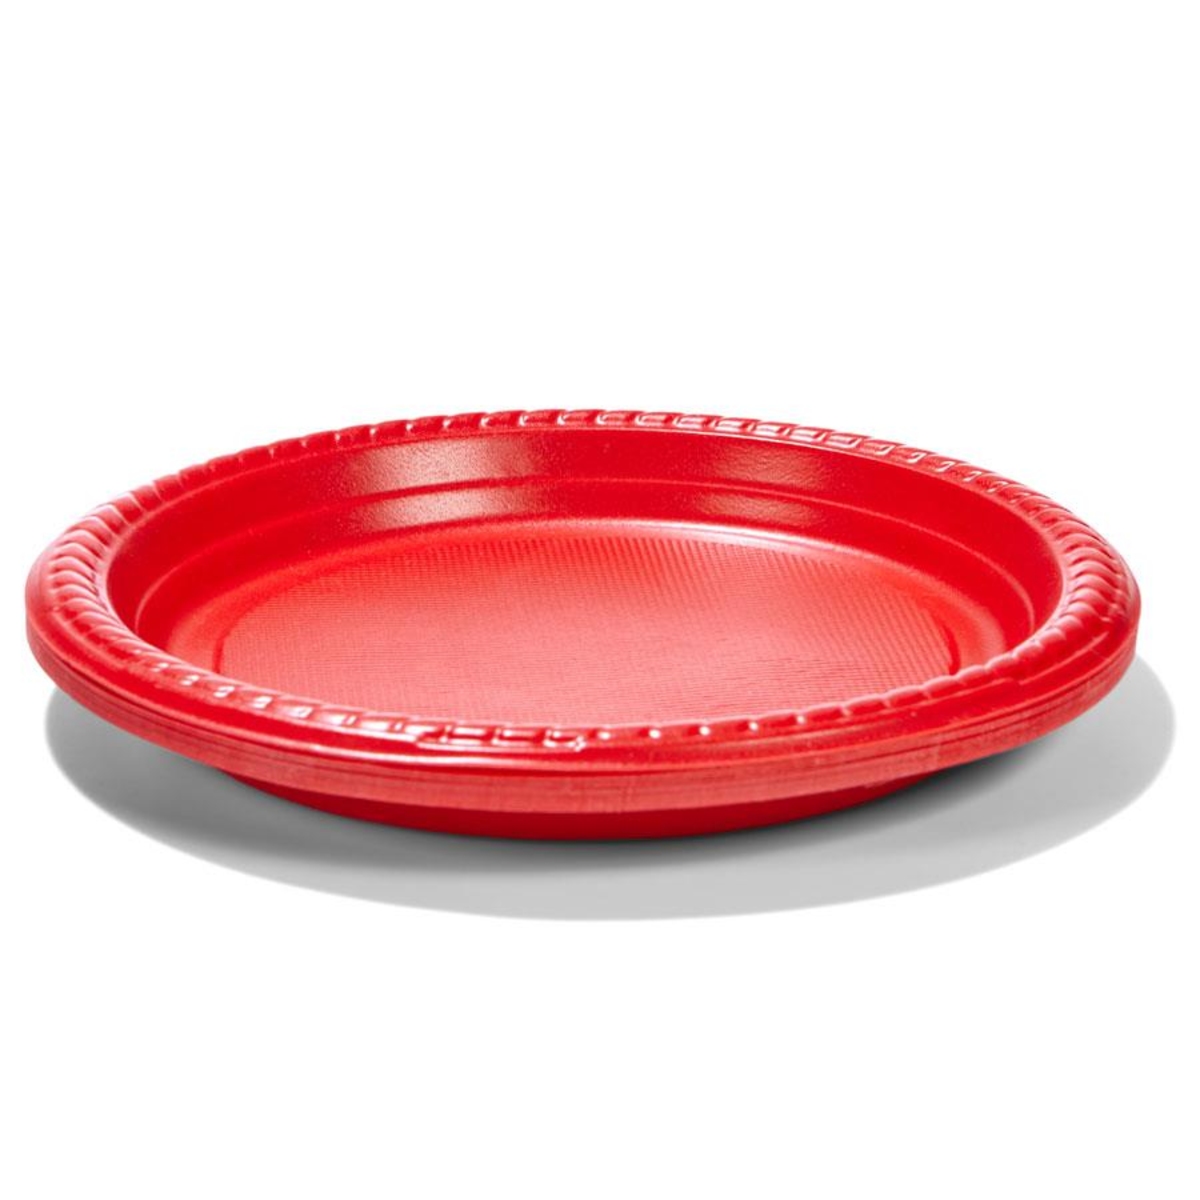 16 Pack Red Plastic Plates Kmart